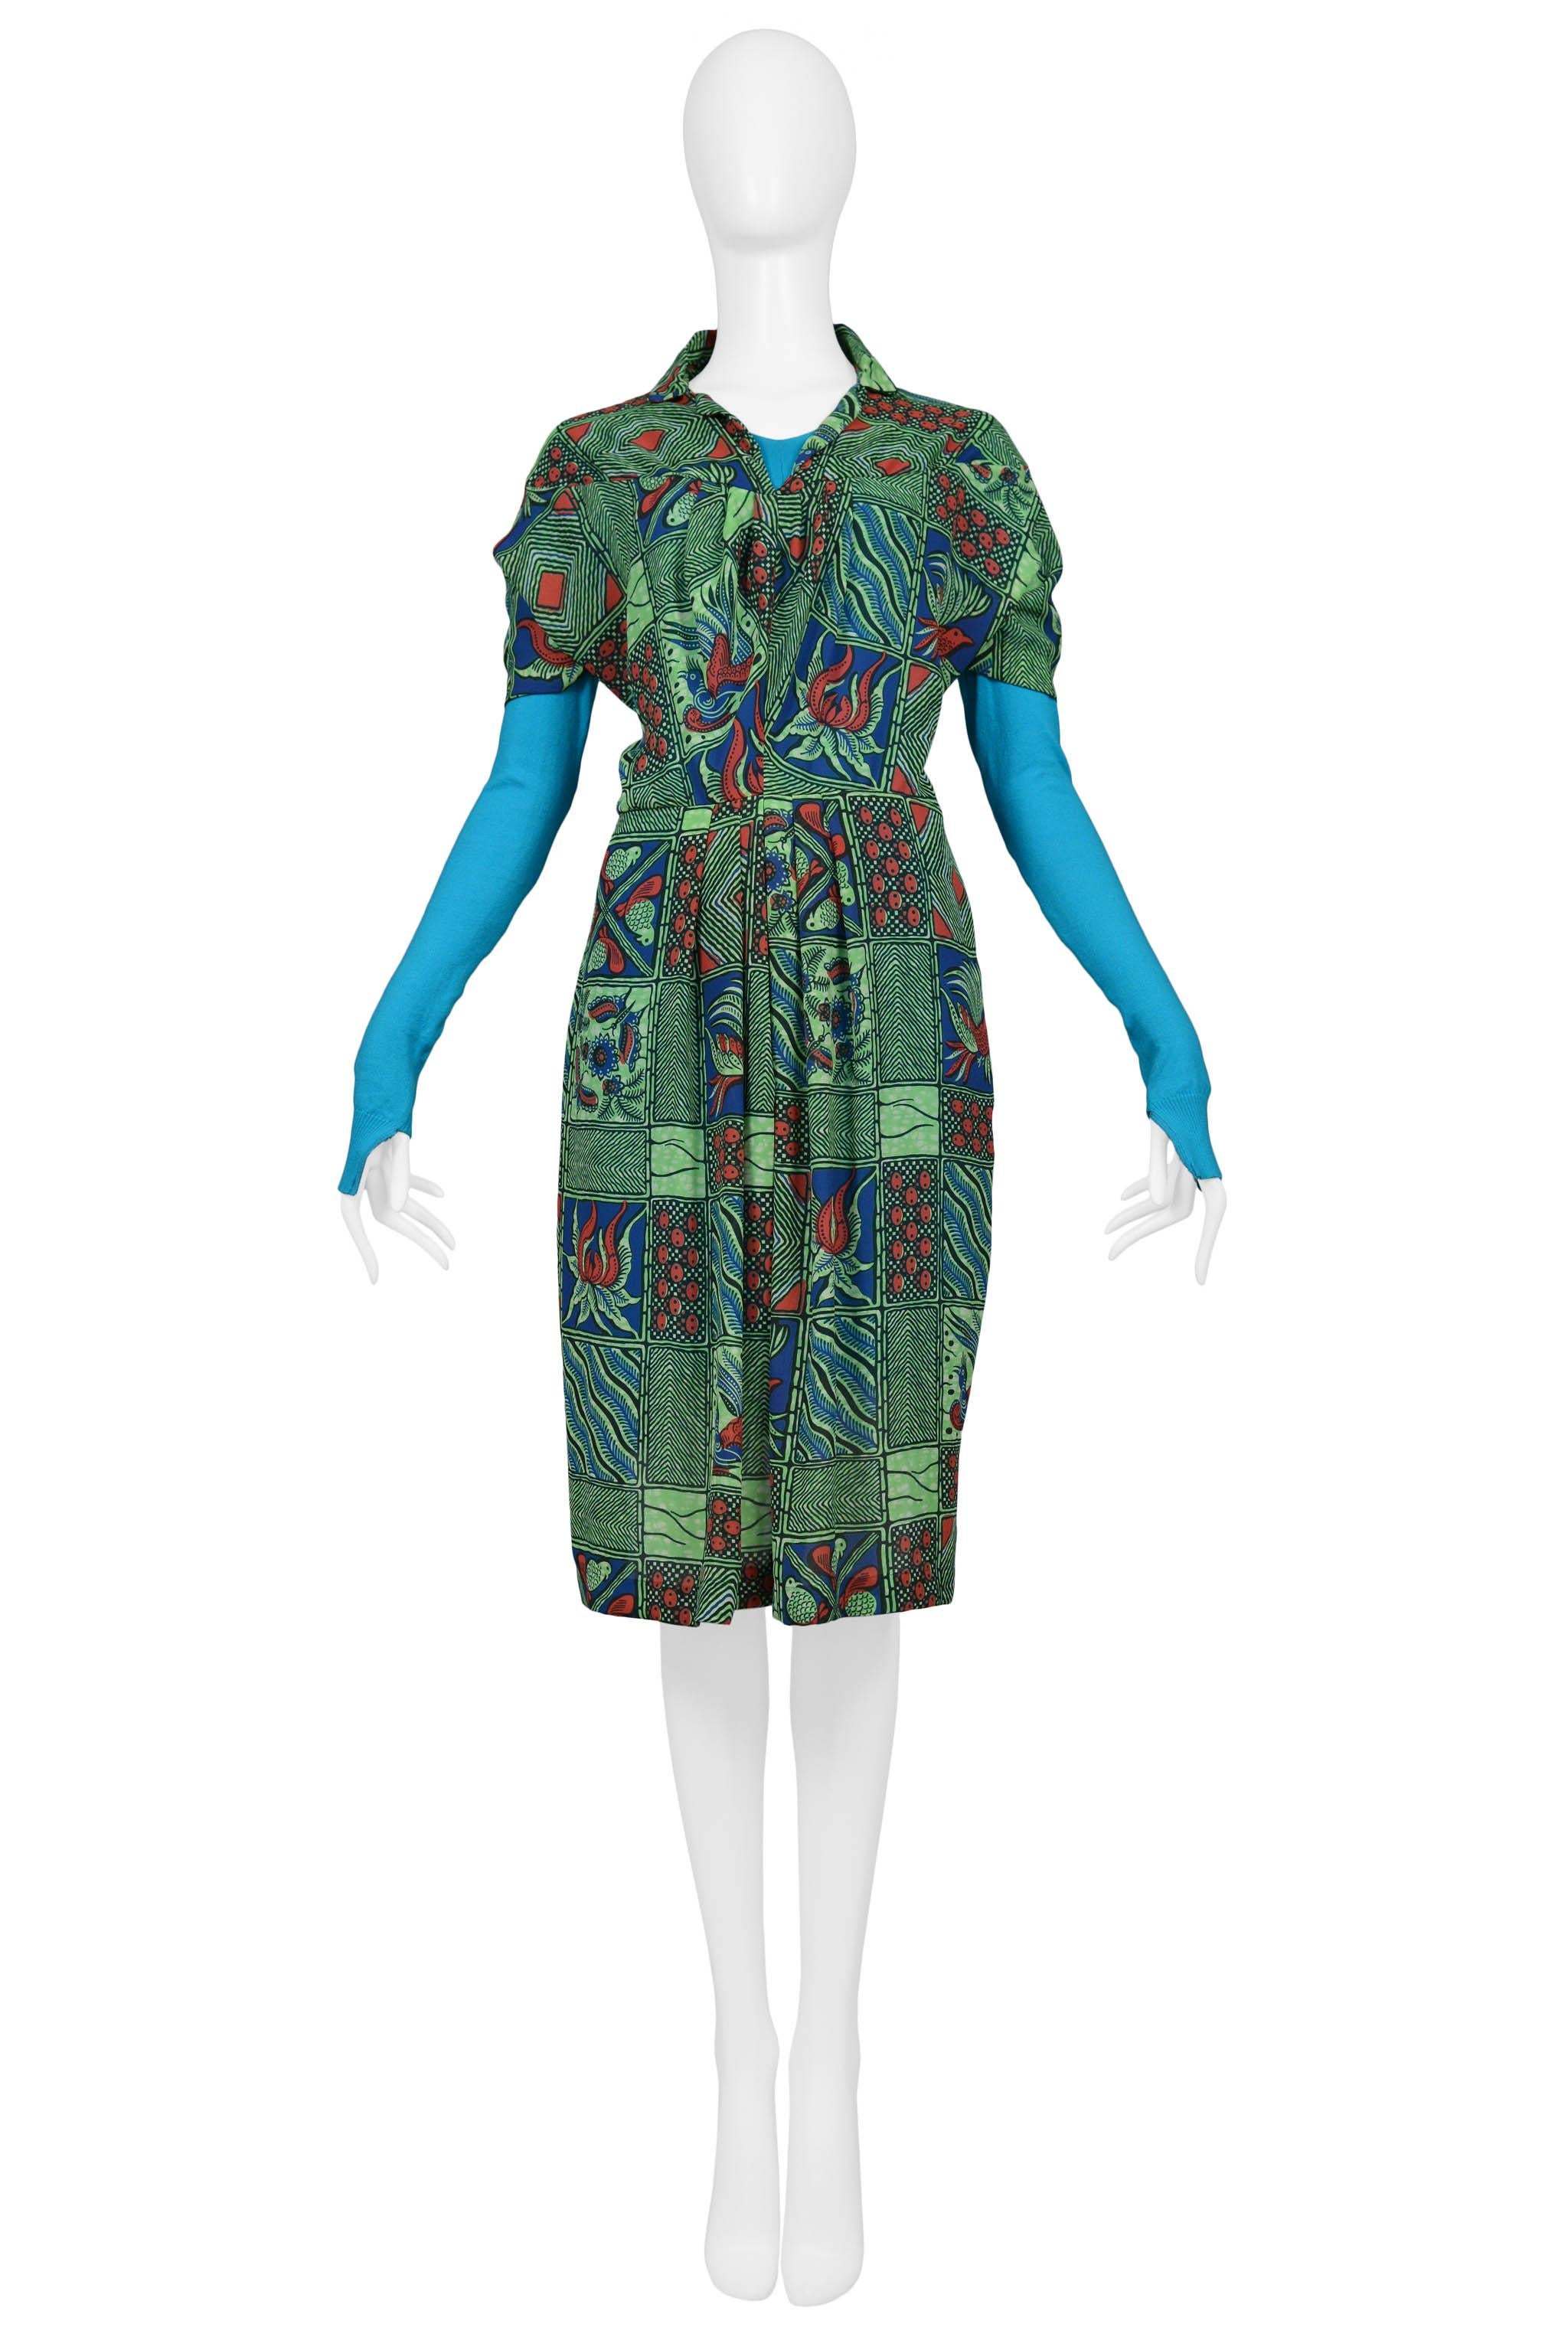 Resurrection Vintage is excited to offer a vintage Junya Watanabe Afrikaans panel shirt dress featuring bright blue knit sleeves and back panel, collar, and pleats. Collection 2009.

Junya Watanabe
Size: Small
Knit and Woven Polyester
2009